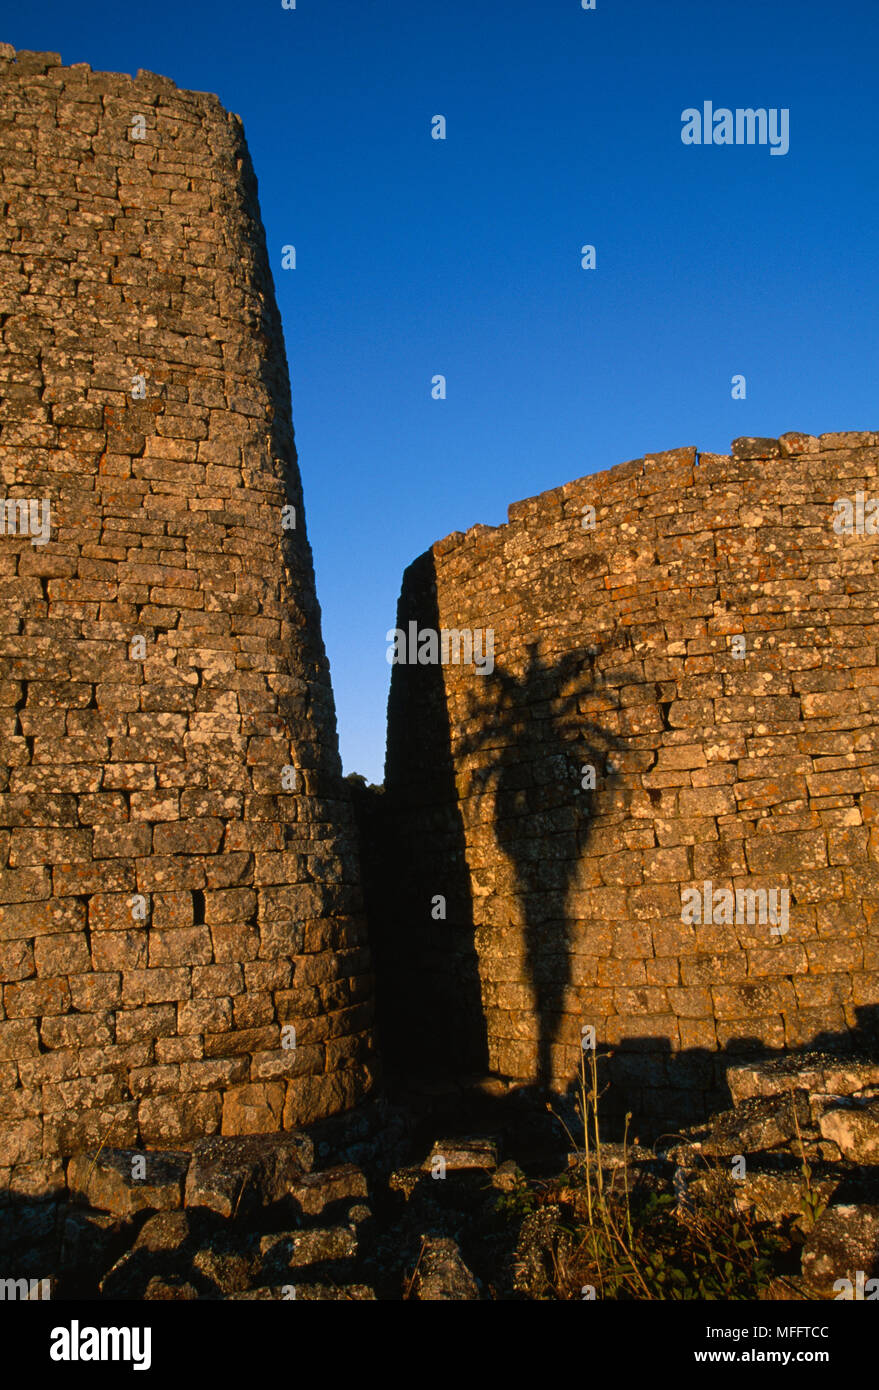 GREAT ZIMBABWE RUINS Silhoutte of an aloe on the walls  of the Great Enclosure Zimbabwe, southern Africa Stock Photo